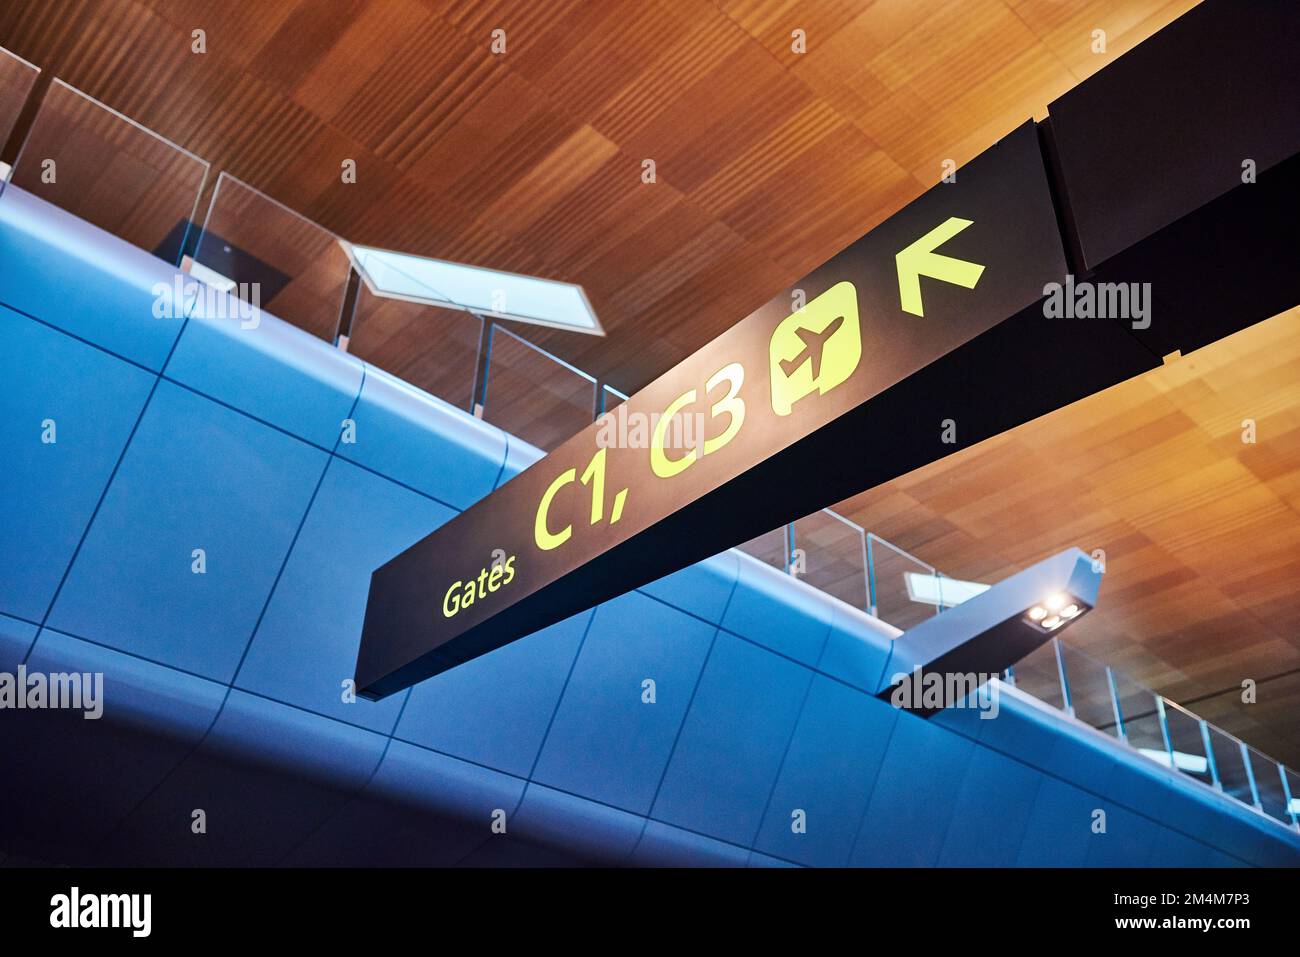 This is where you need to be. a sign directing you where to go at the airport. Stock Photo